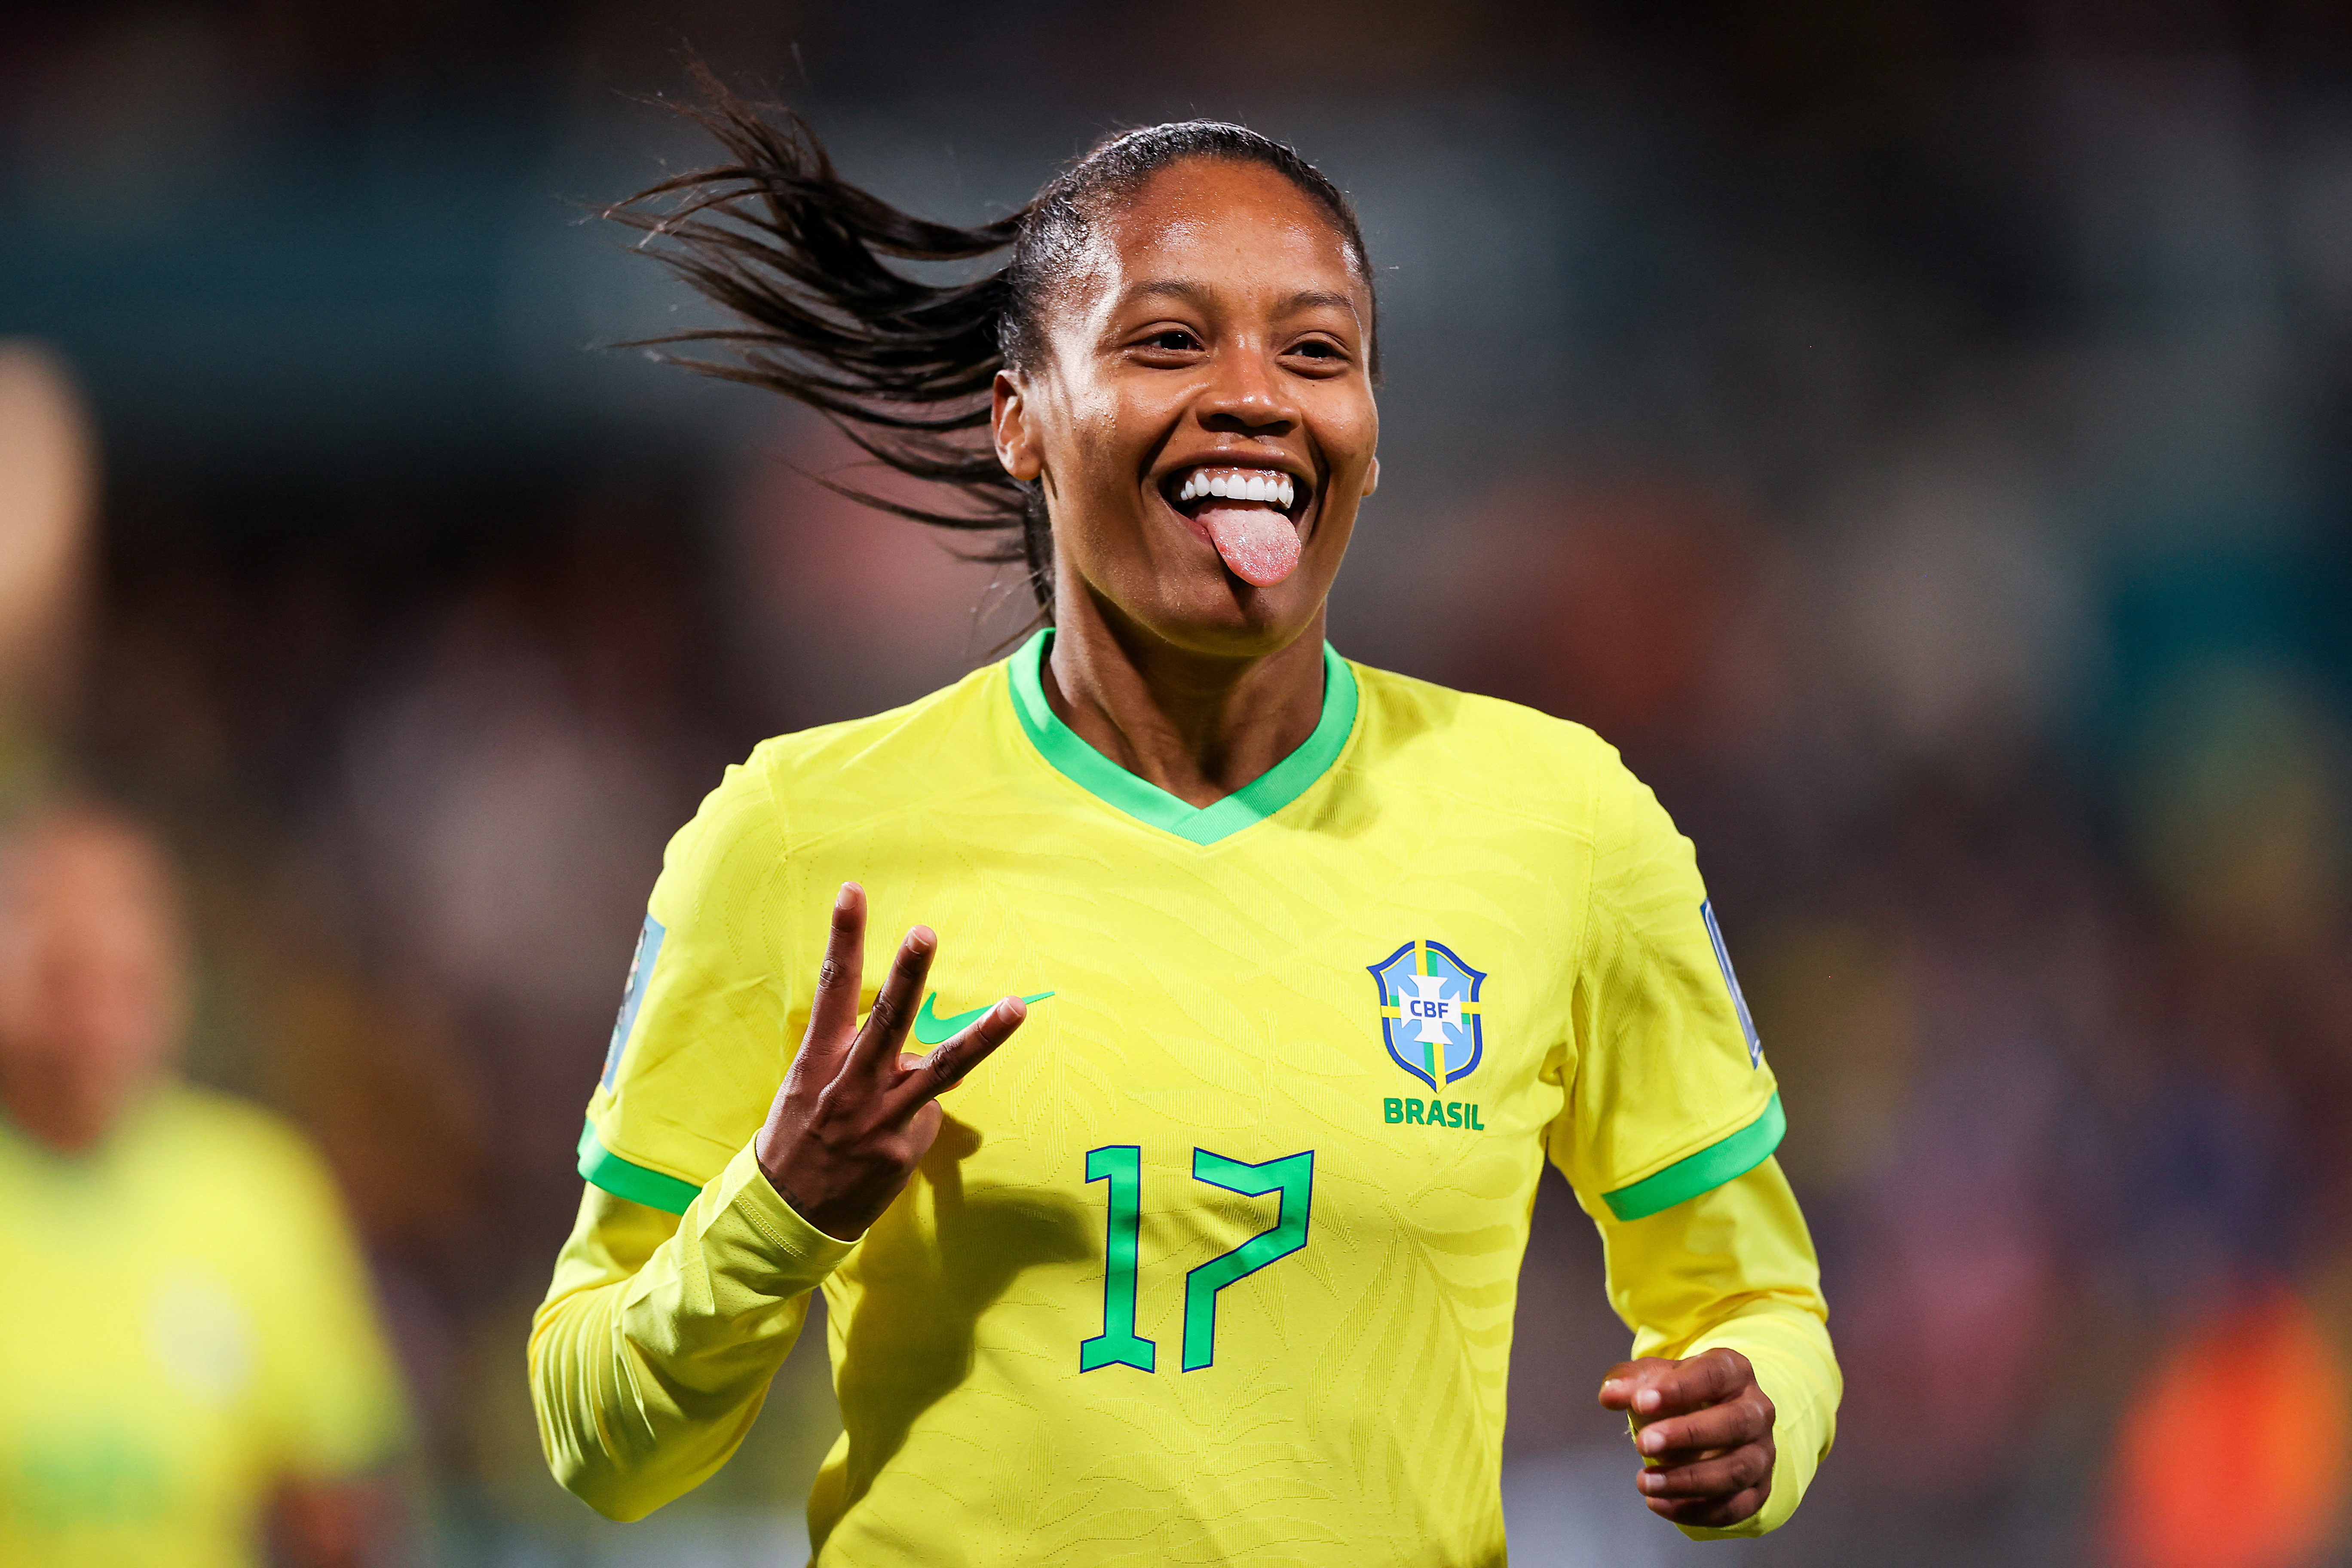 Brazil's hat-trick hero Borges exceeds her wildest dreams on World